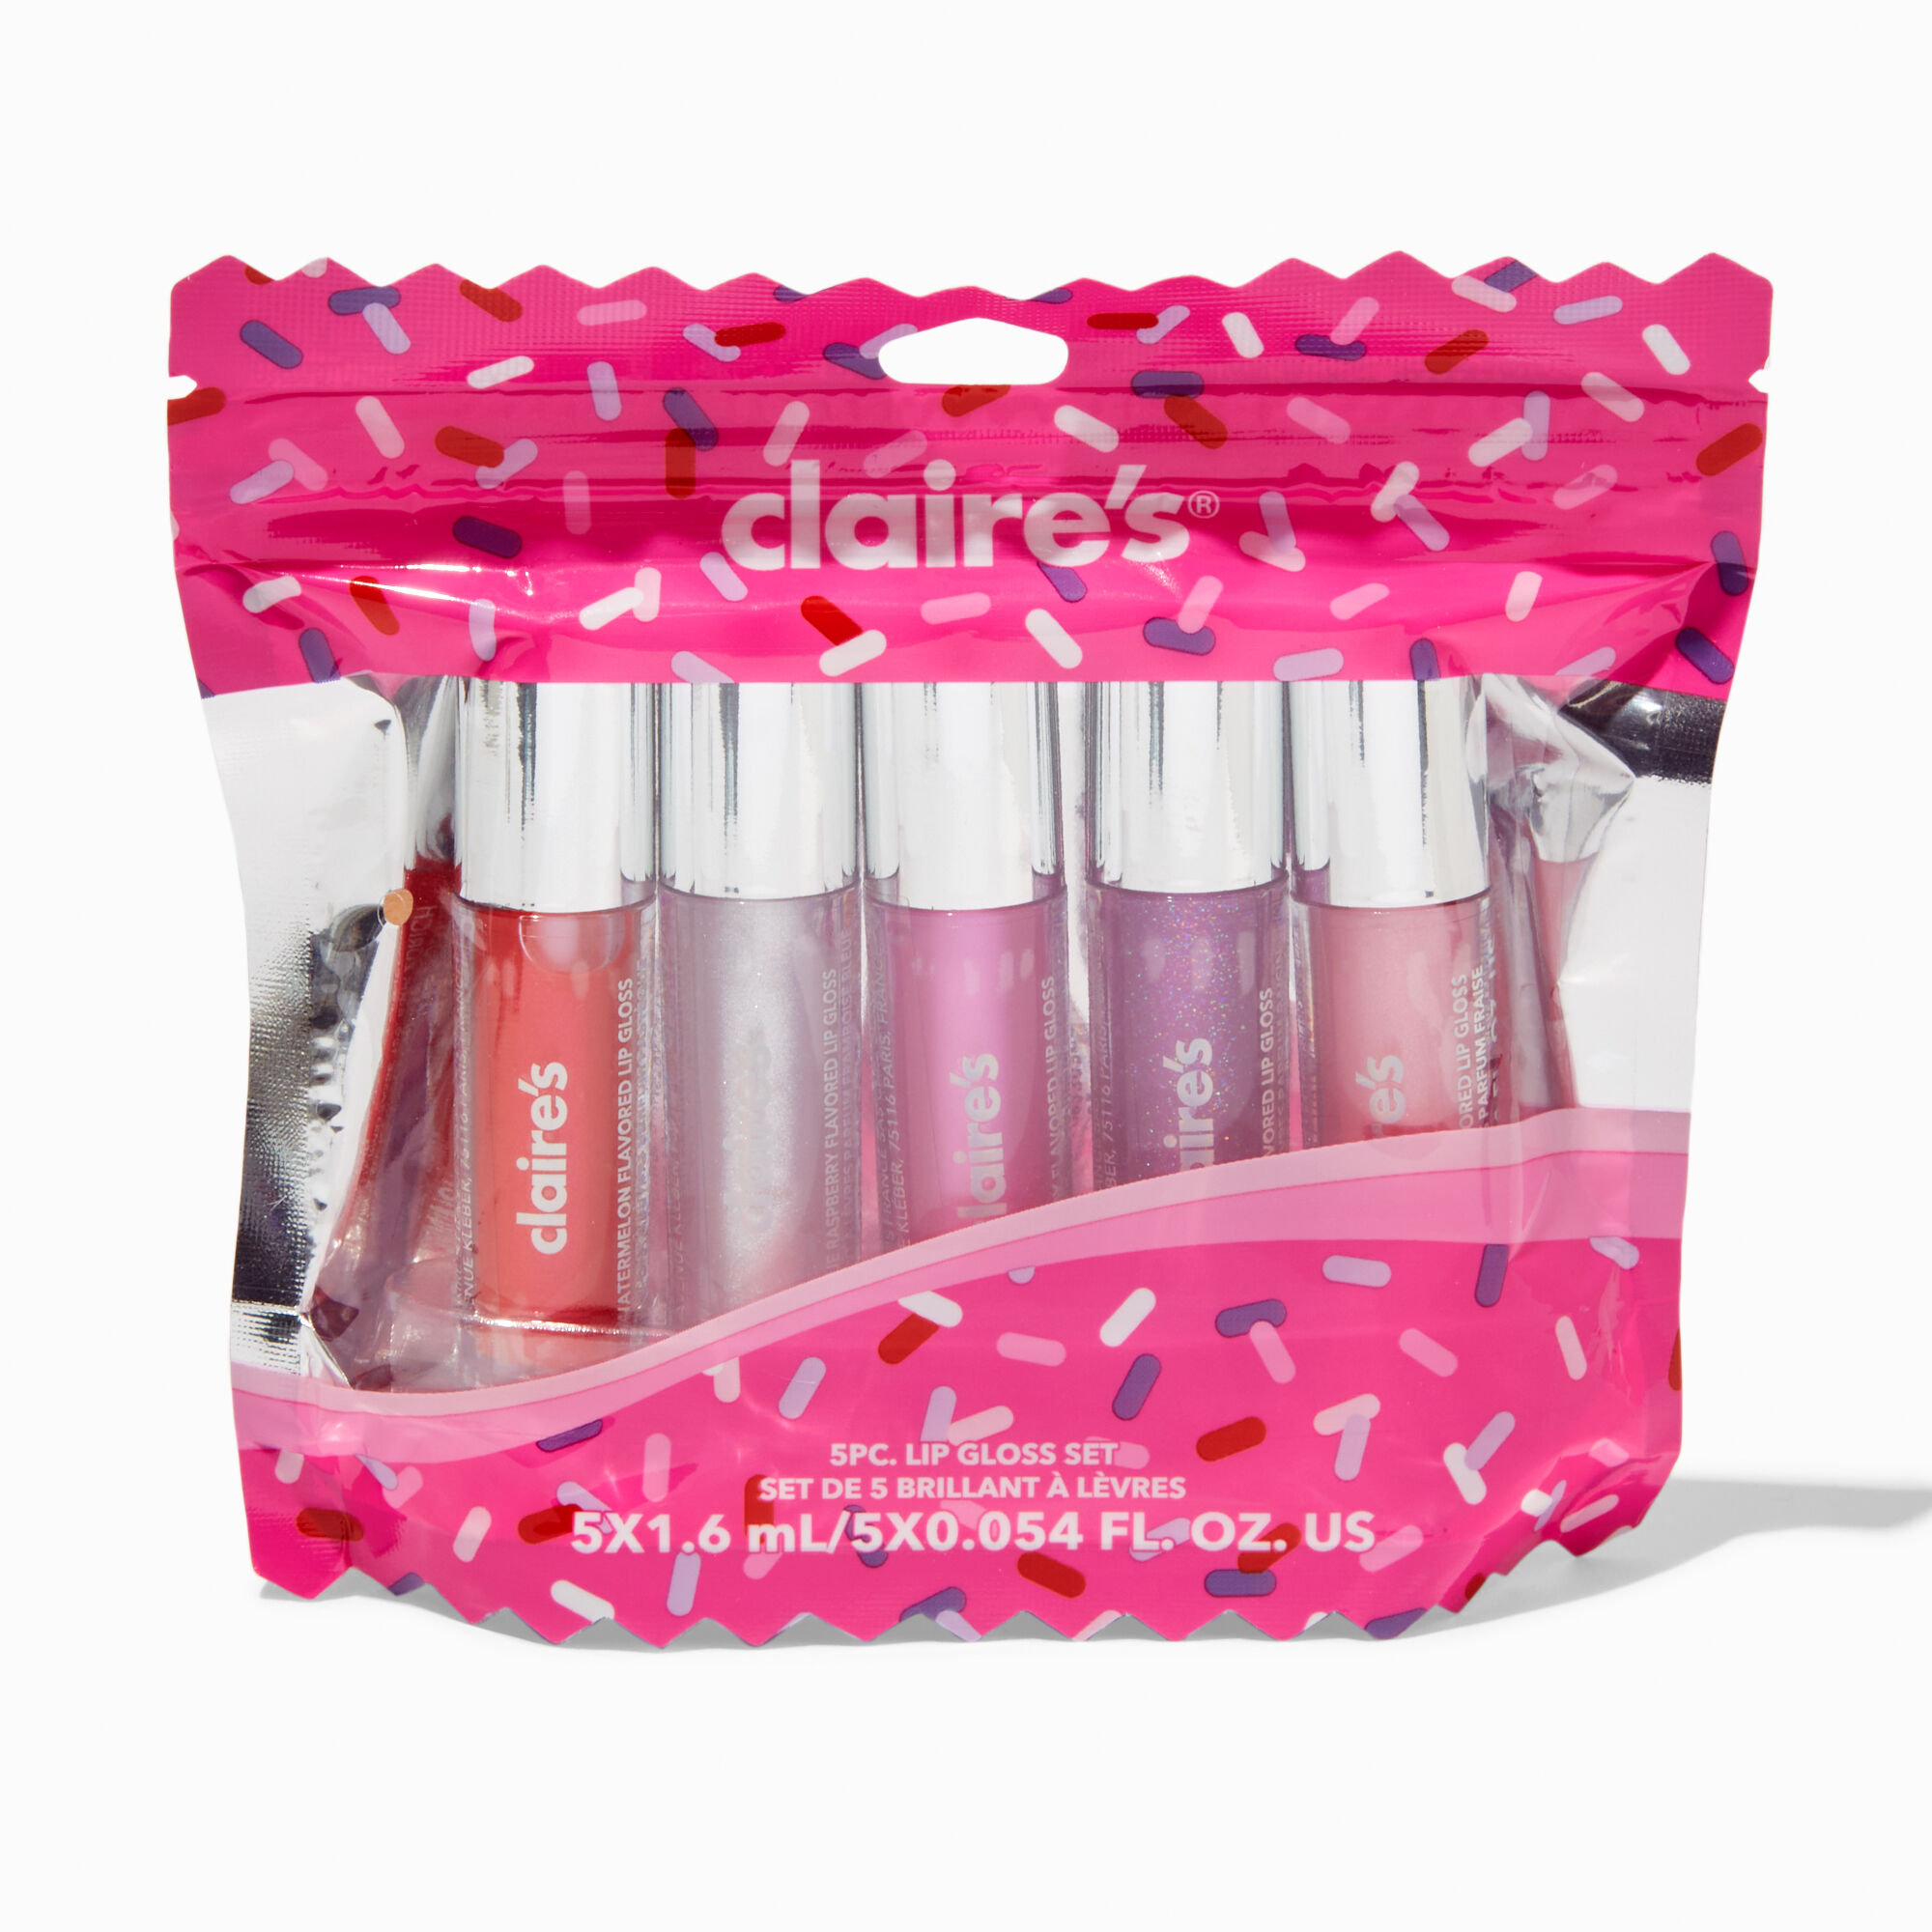 View Claires Sweets Lip Gloss Set 5 Pack information